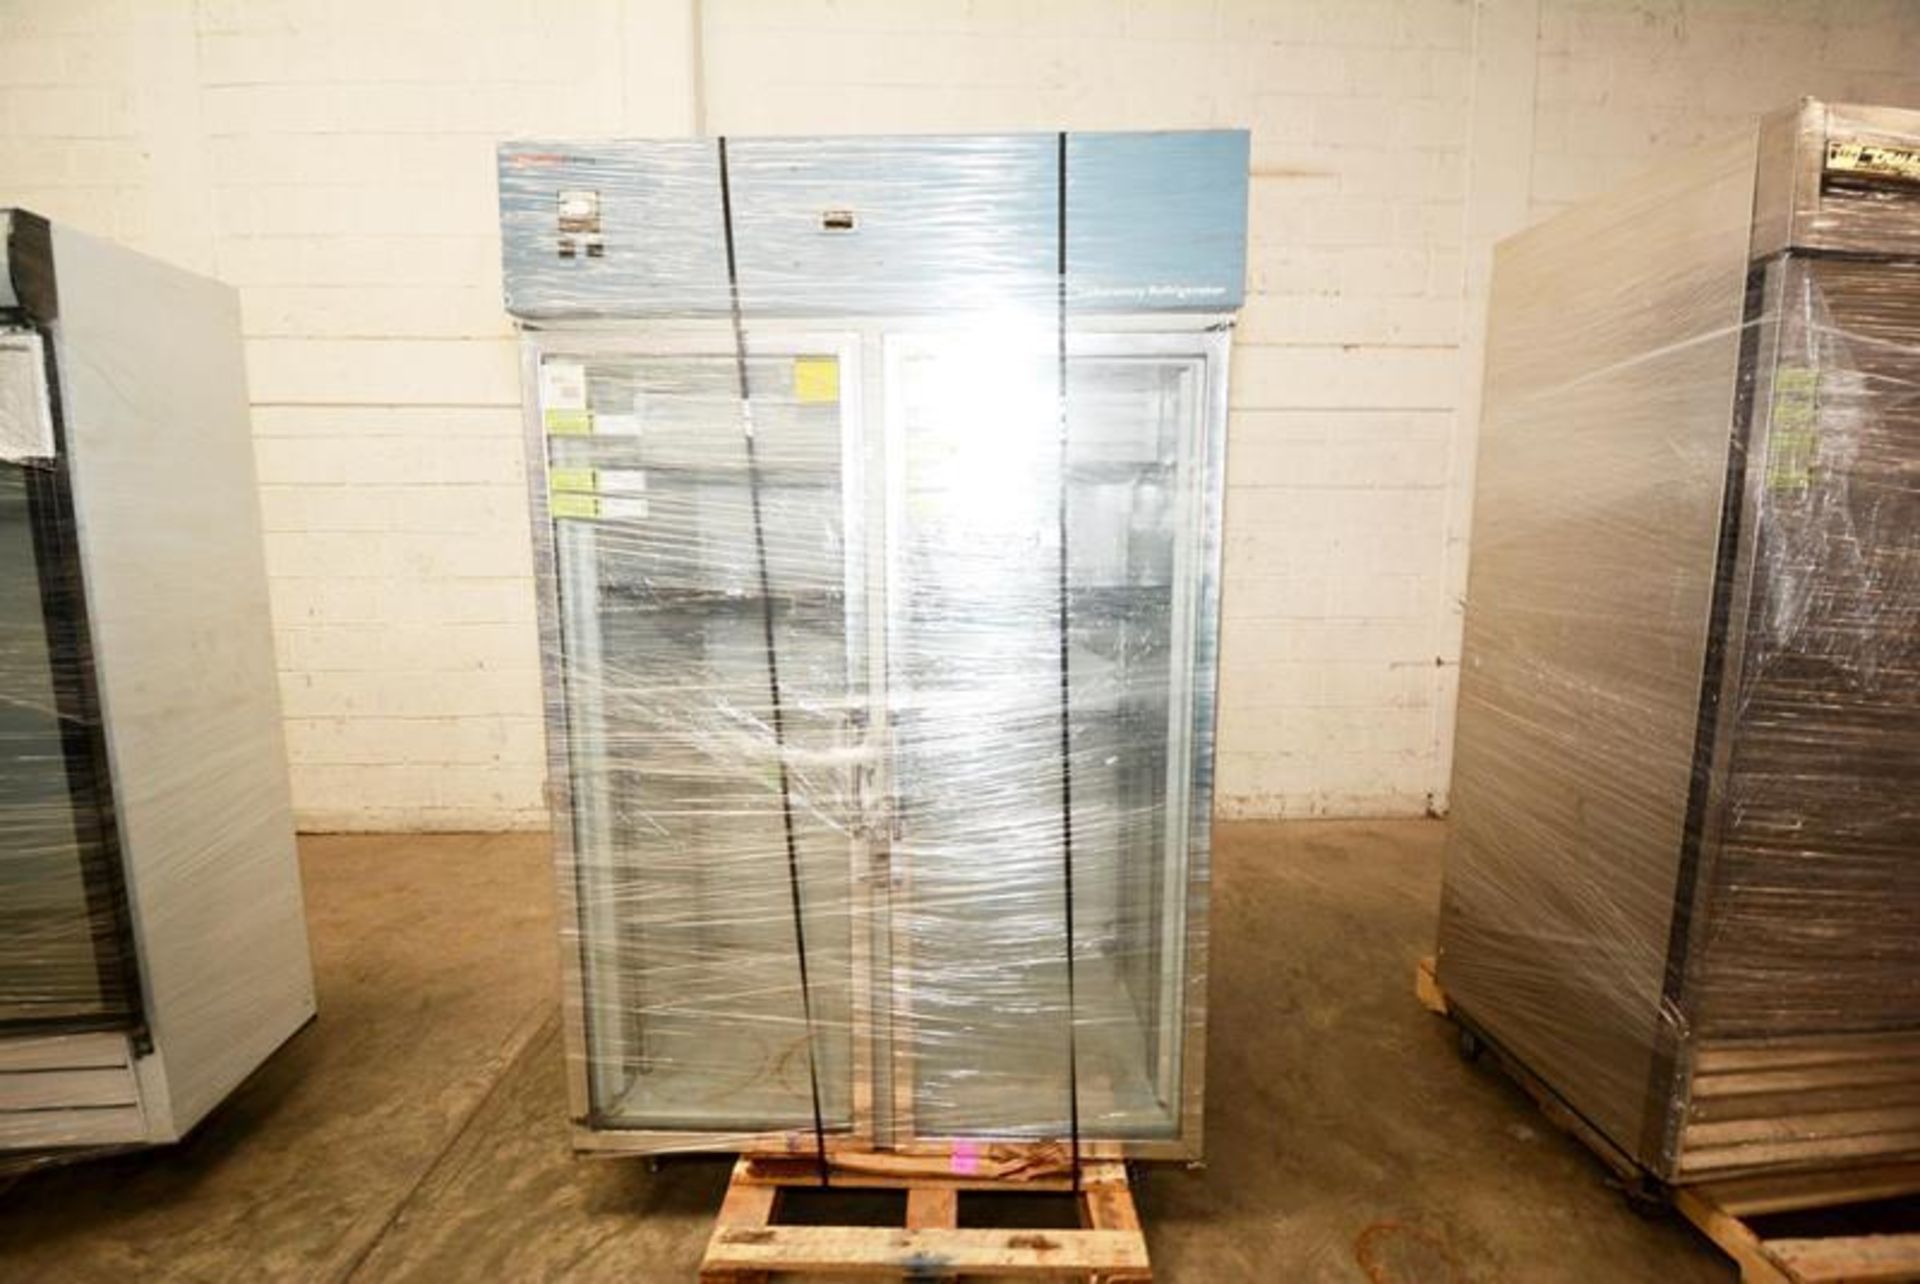 Refrigerator used to keep samples at the QC and testing lab. Located in Cd. Juarez.  Refrigerador - Image 5 of 14